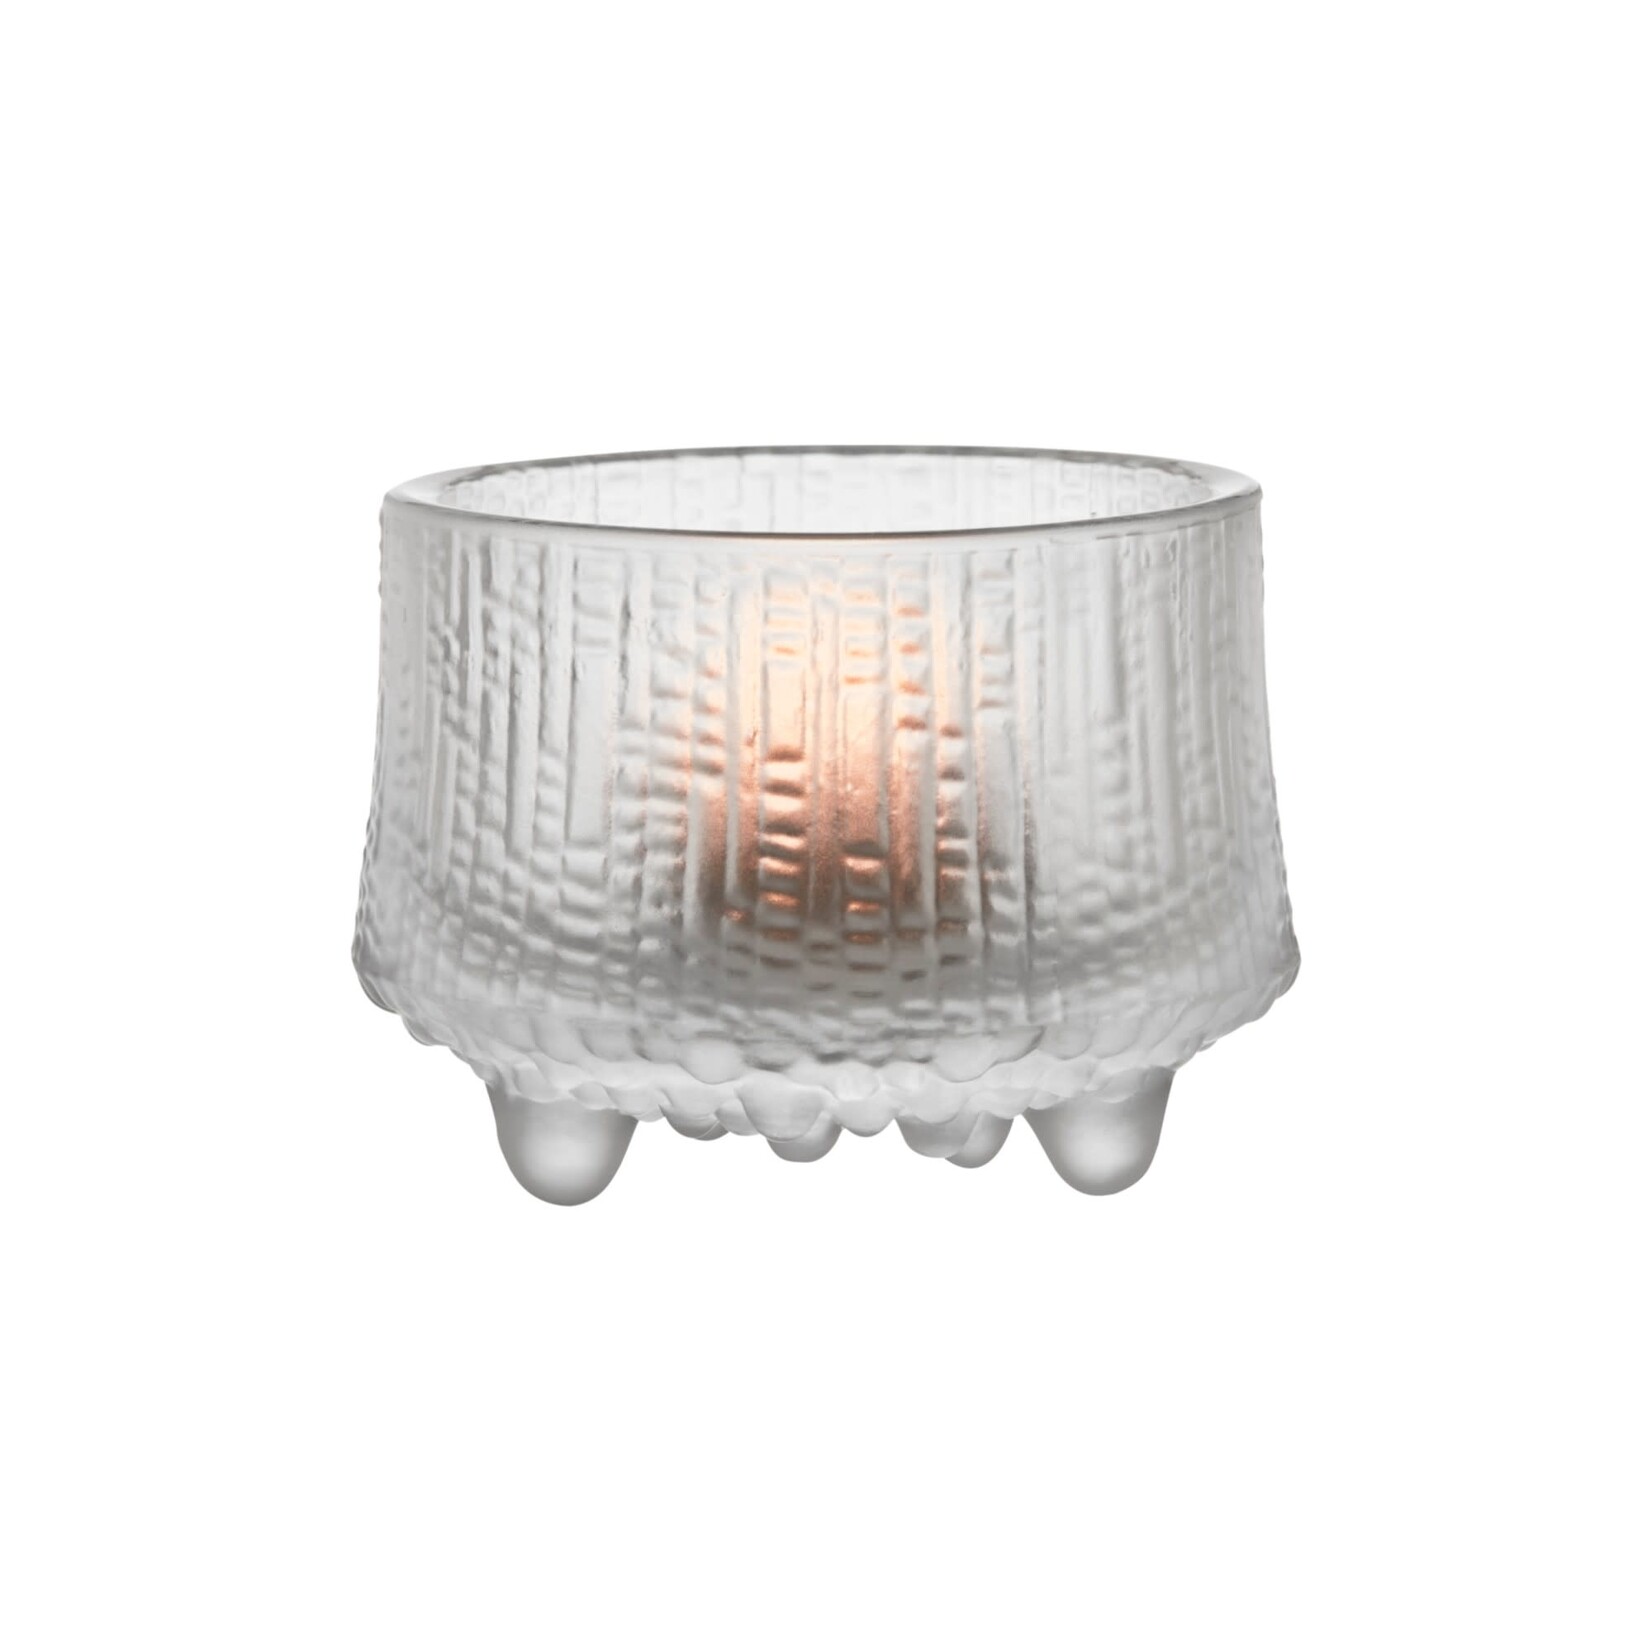 Ultima Thule Tealight Frosted